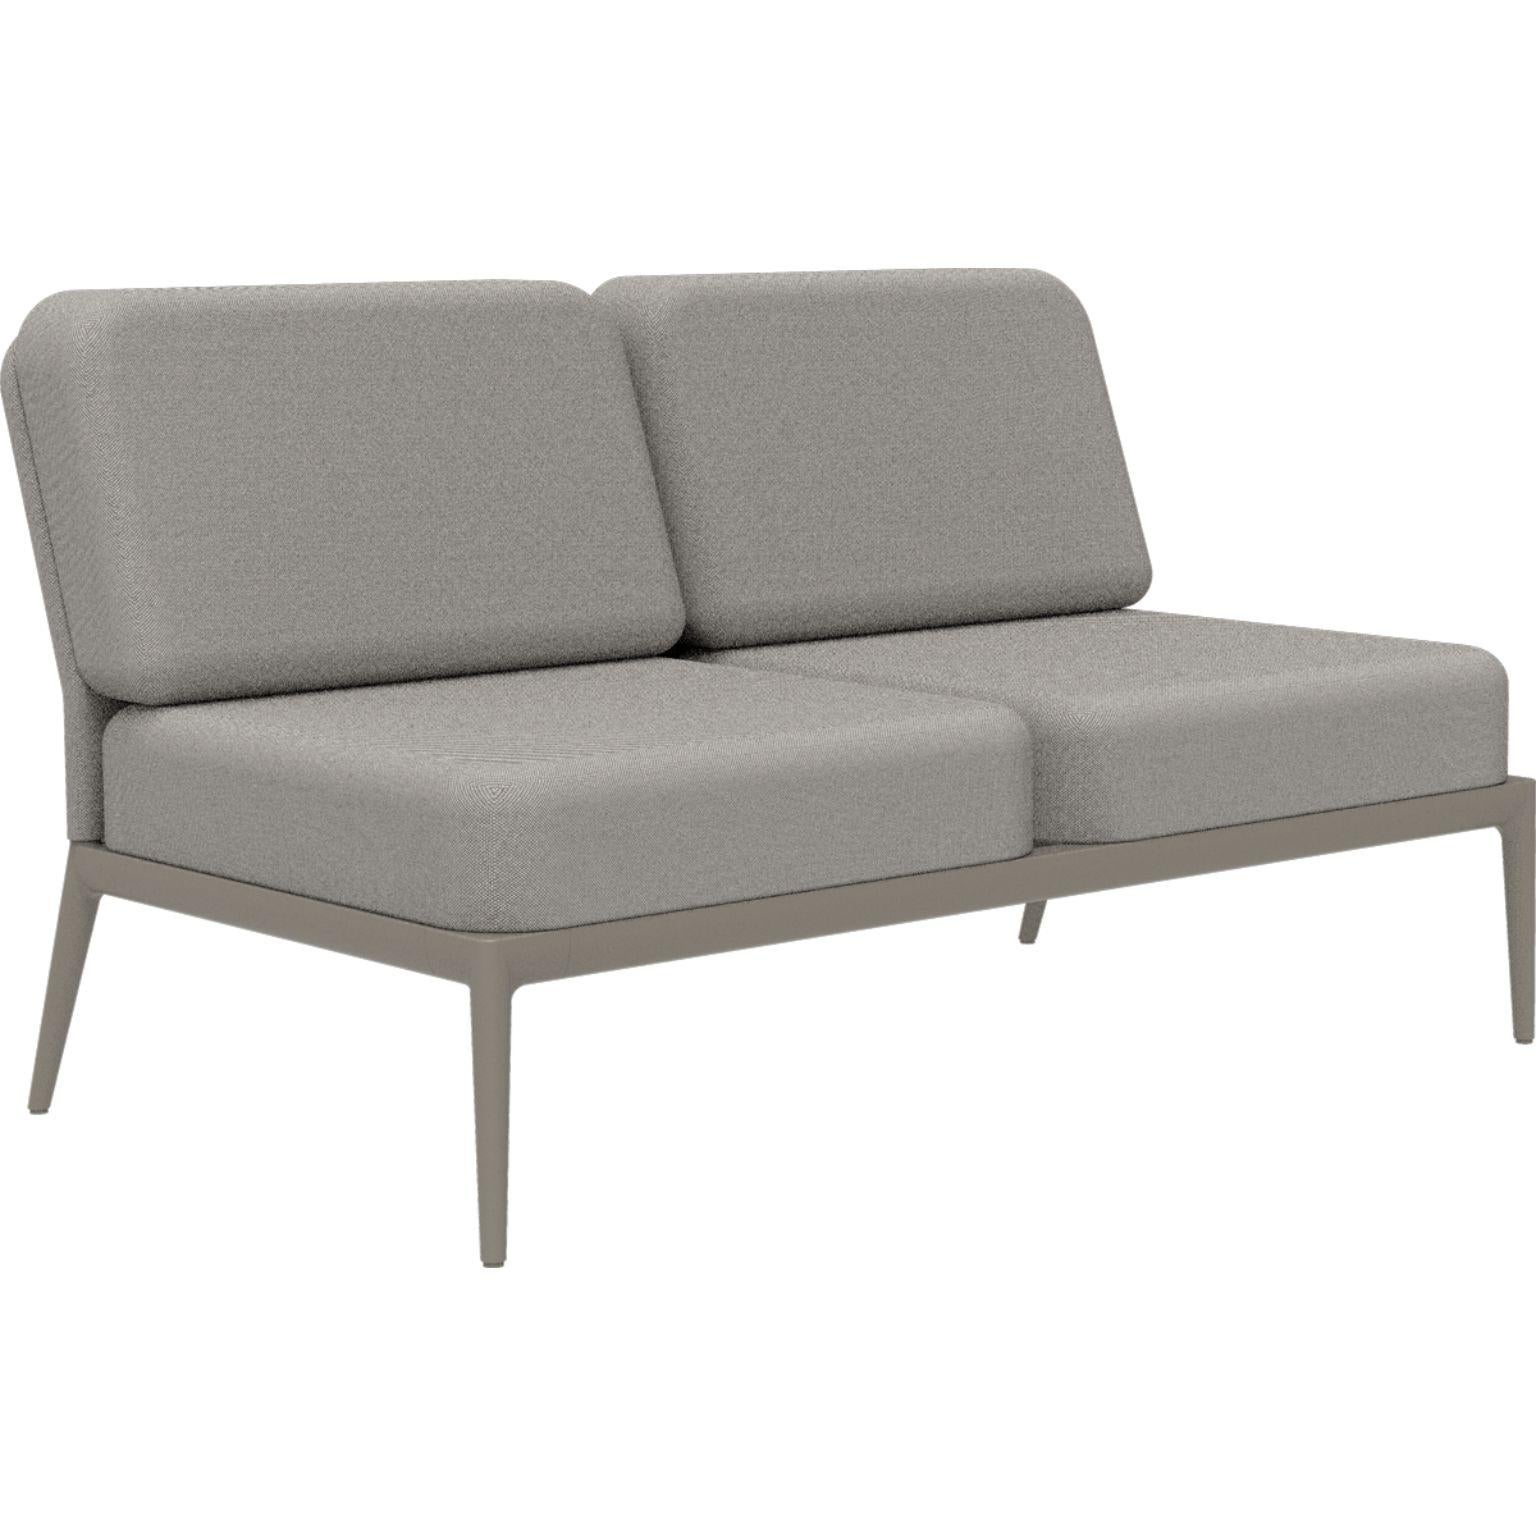 Cover Cream Double Central Modular Sofa by MOWEE.
Dimensions: D83 x W136 x H81 cm (seat height 42 cm).
Material: aluminum and upholstery.
Weight: 27 kg.
Also available in different colors and finishes. 

An unmistakable collection for its